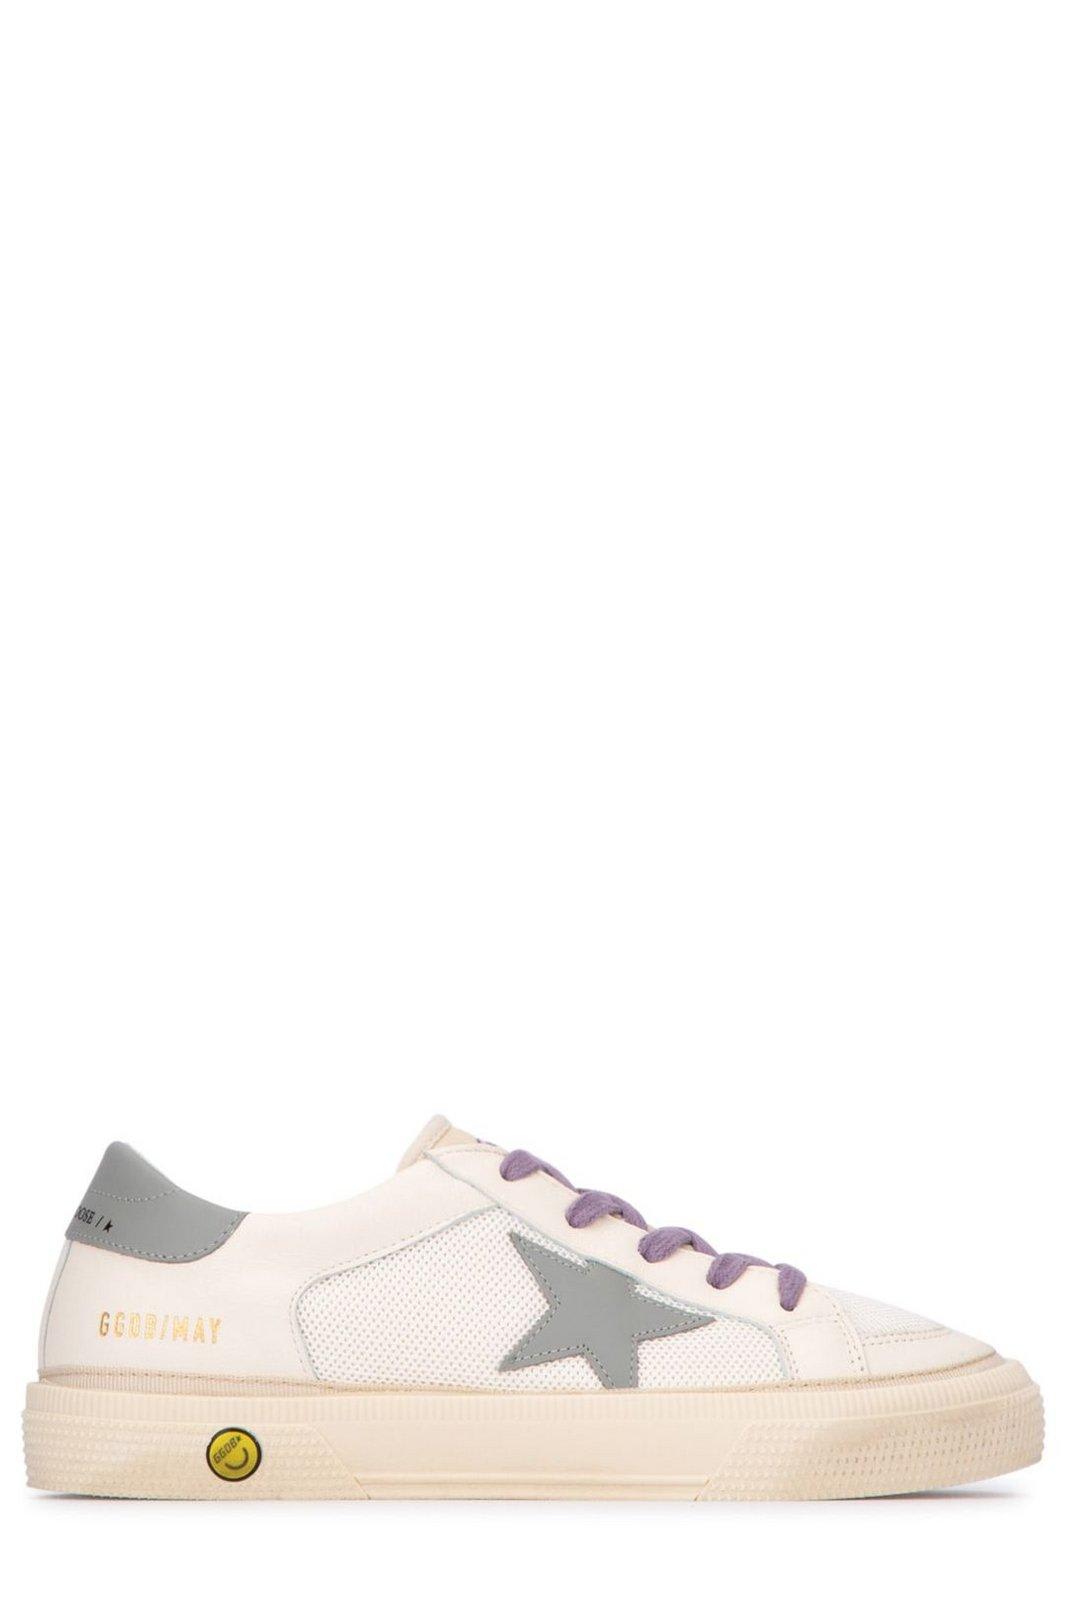 Golden Goose Kids' May Mesh Panelled Lace-up Sneakers In White/grey